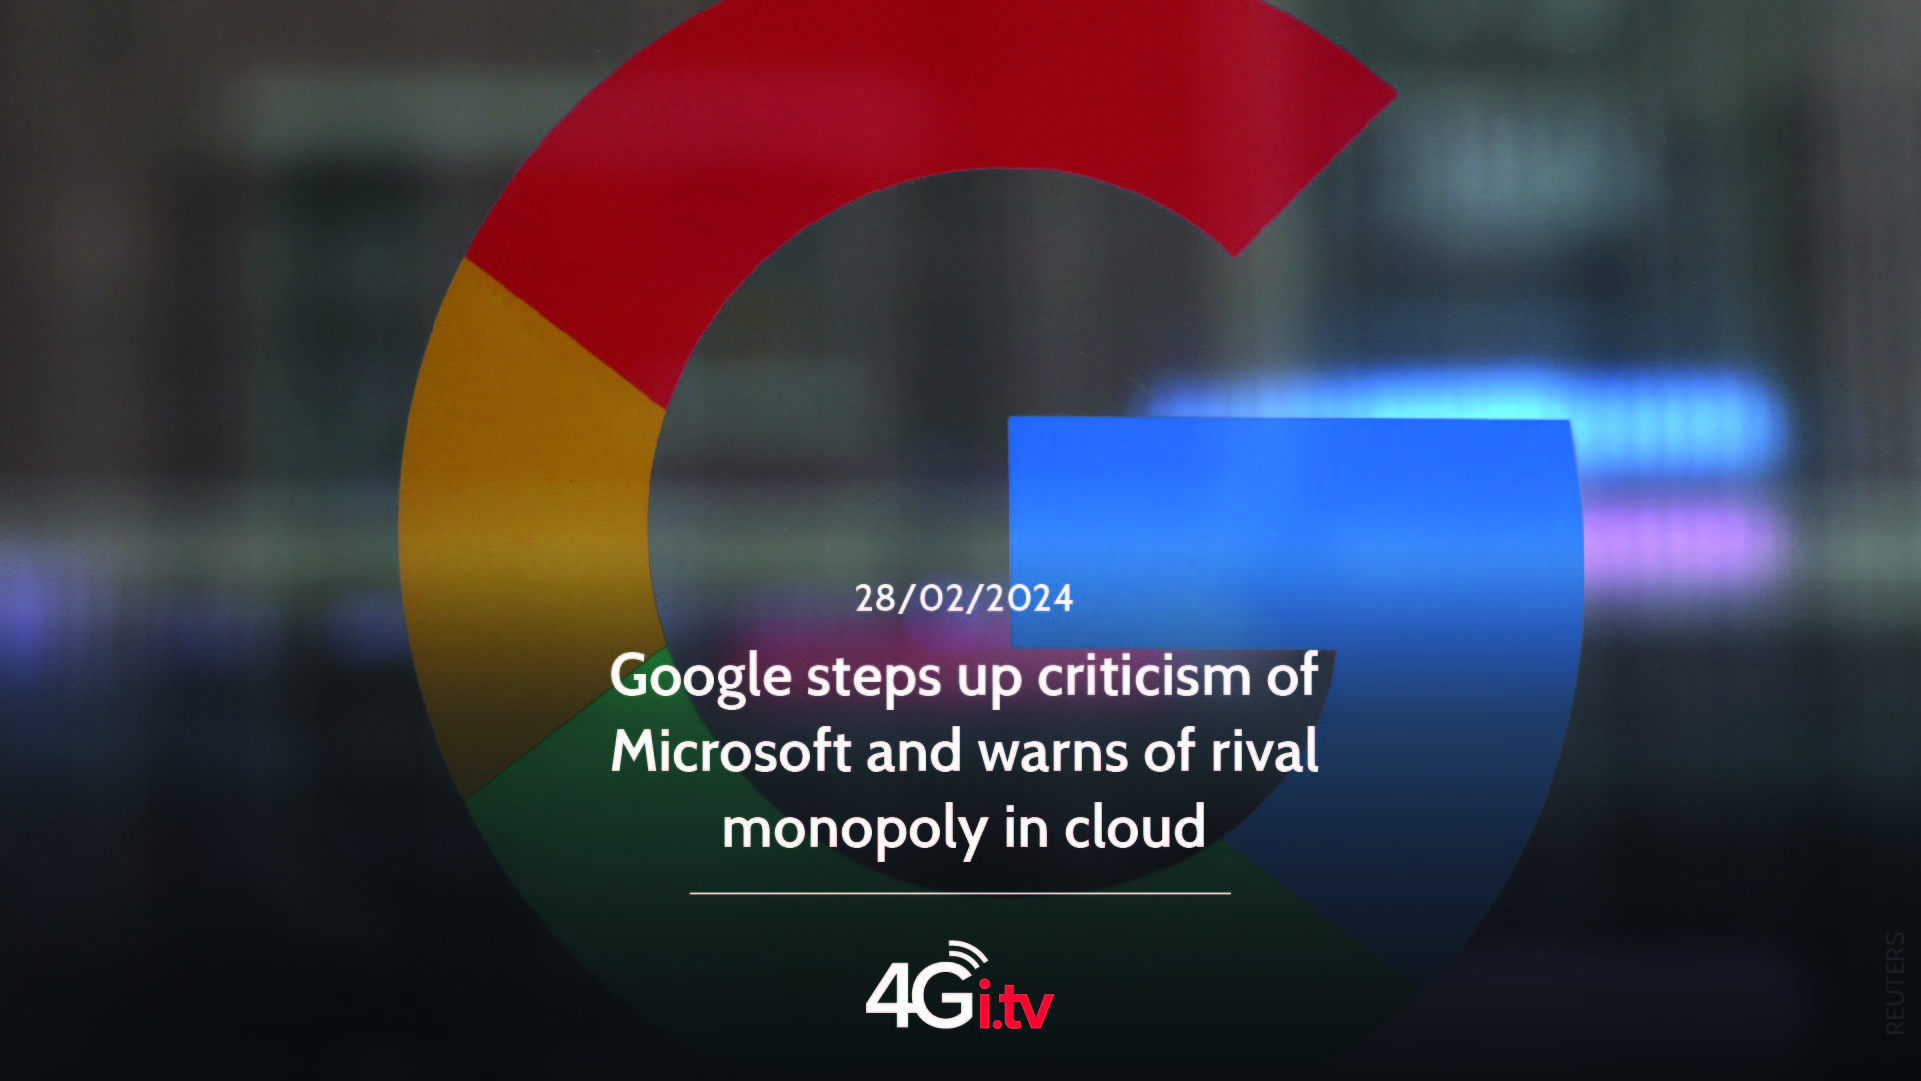 Подробнее о статье Google steps up criticism of Microsoft and warns of rival monopoly in cloud